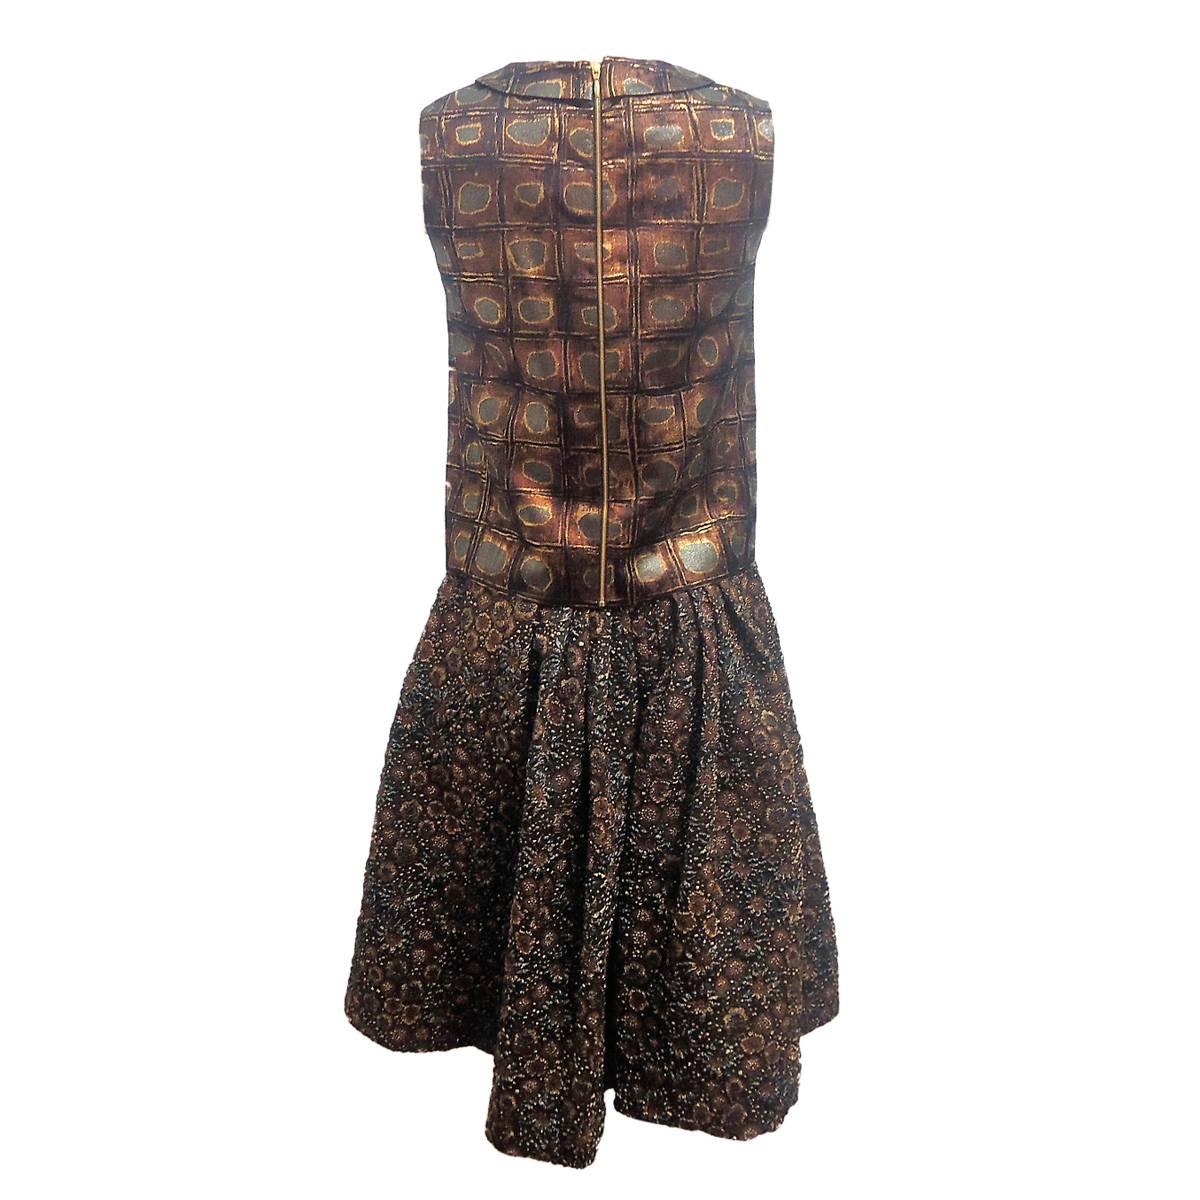 Magnificent skirt and top suit by Rochas, France
Embossed textile
Bronze tones
Fantastic embroidered skirt
Geometric top
Size italian 40 (US 4/6)
Made in Italy
Worldwide express shipping included in the price !